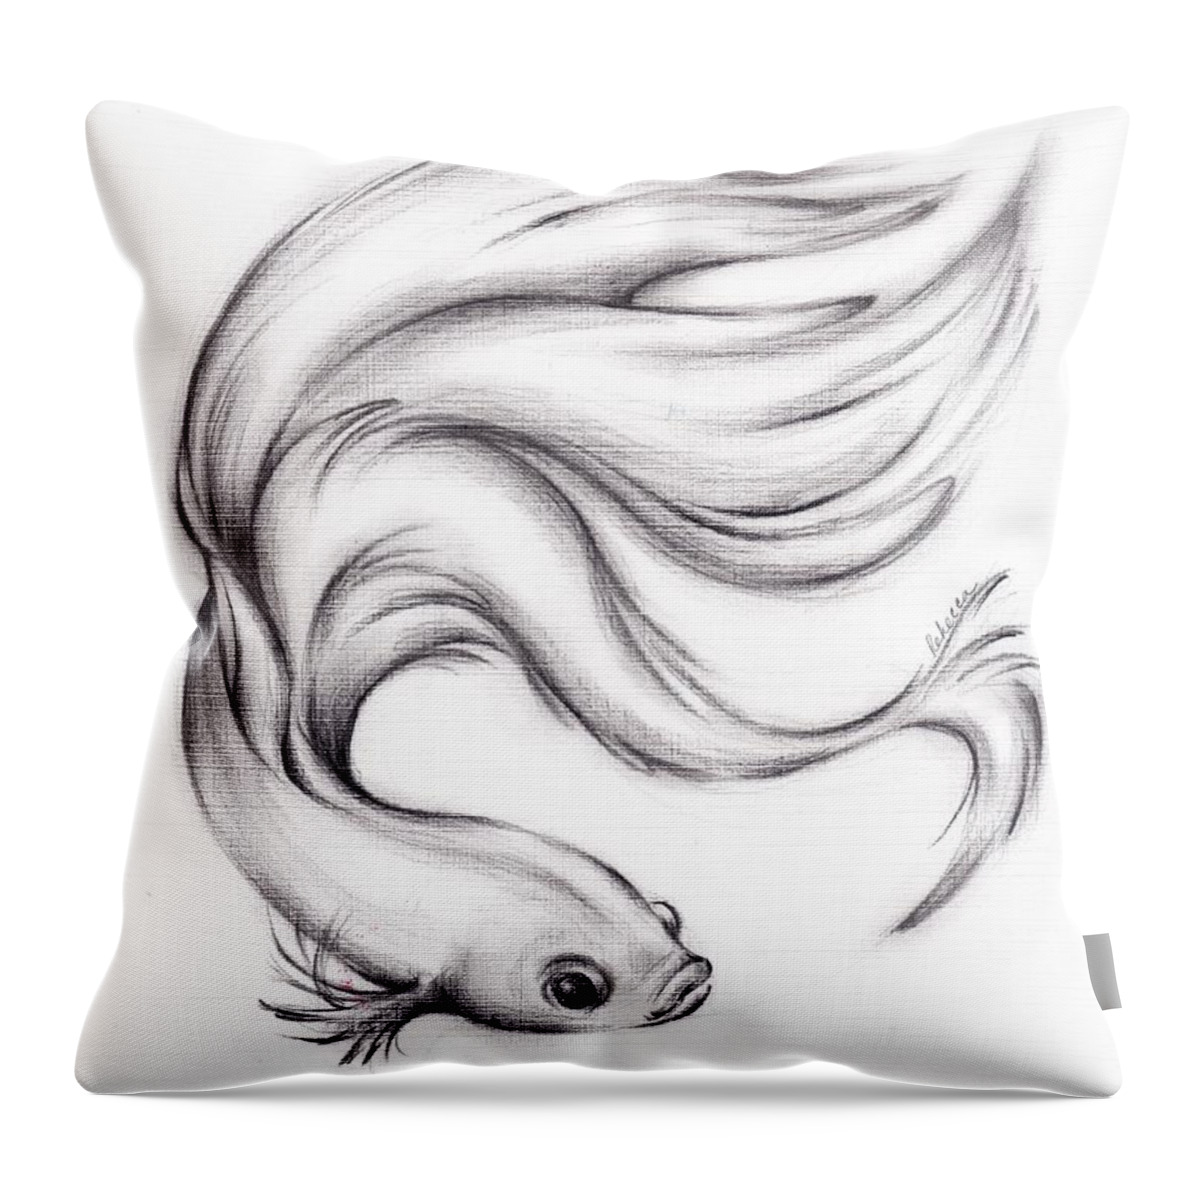 Betta Fish Or Siamese Fighter Of Thailand, Black And White Hand Drawn  Design In Simple. Illustration Isolated On White Background, For Art  Design, Betta Logo. Coloring Book Page And Print Design. Royalty